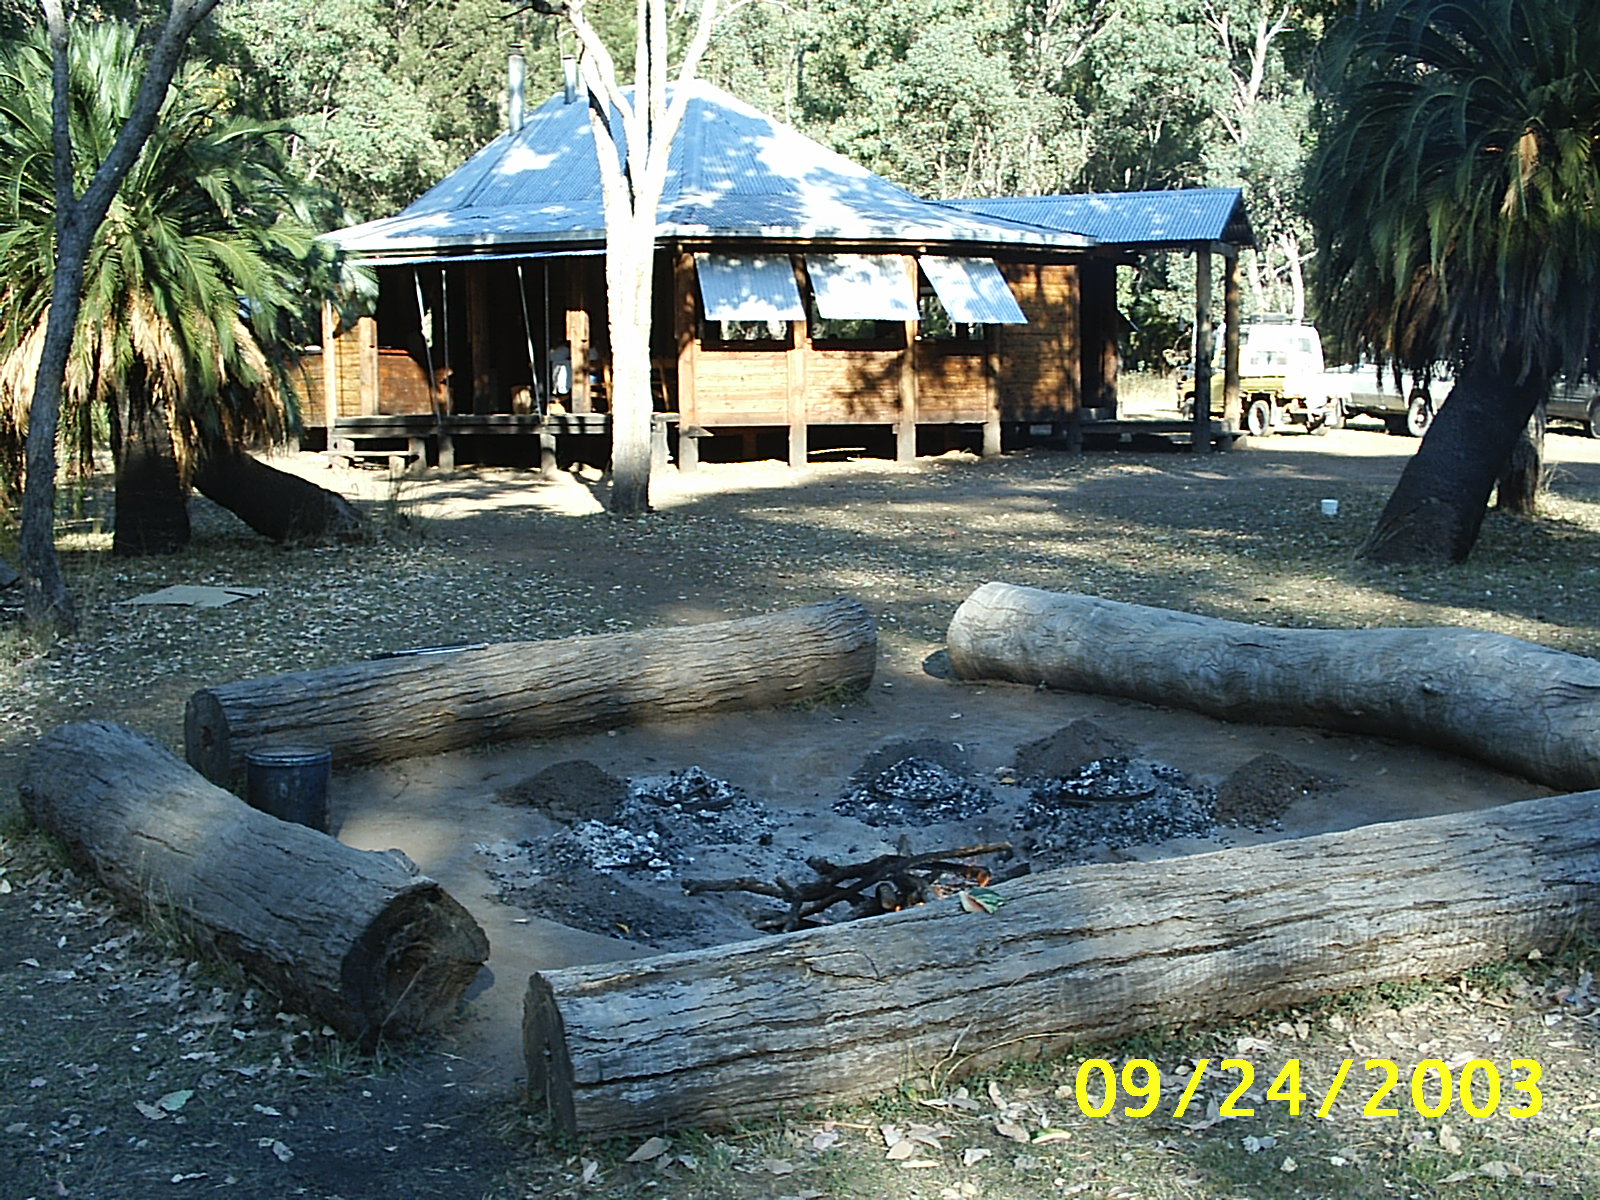 Firepit and dining hall